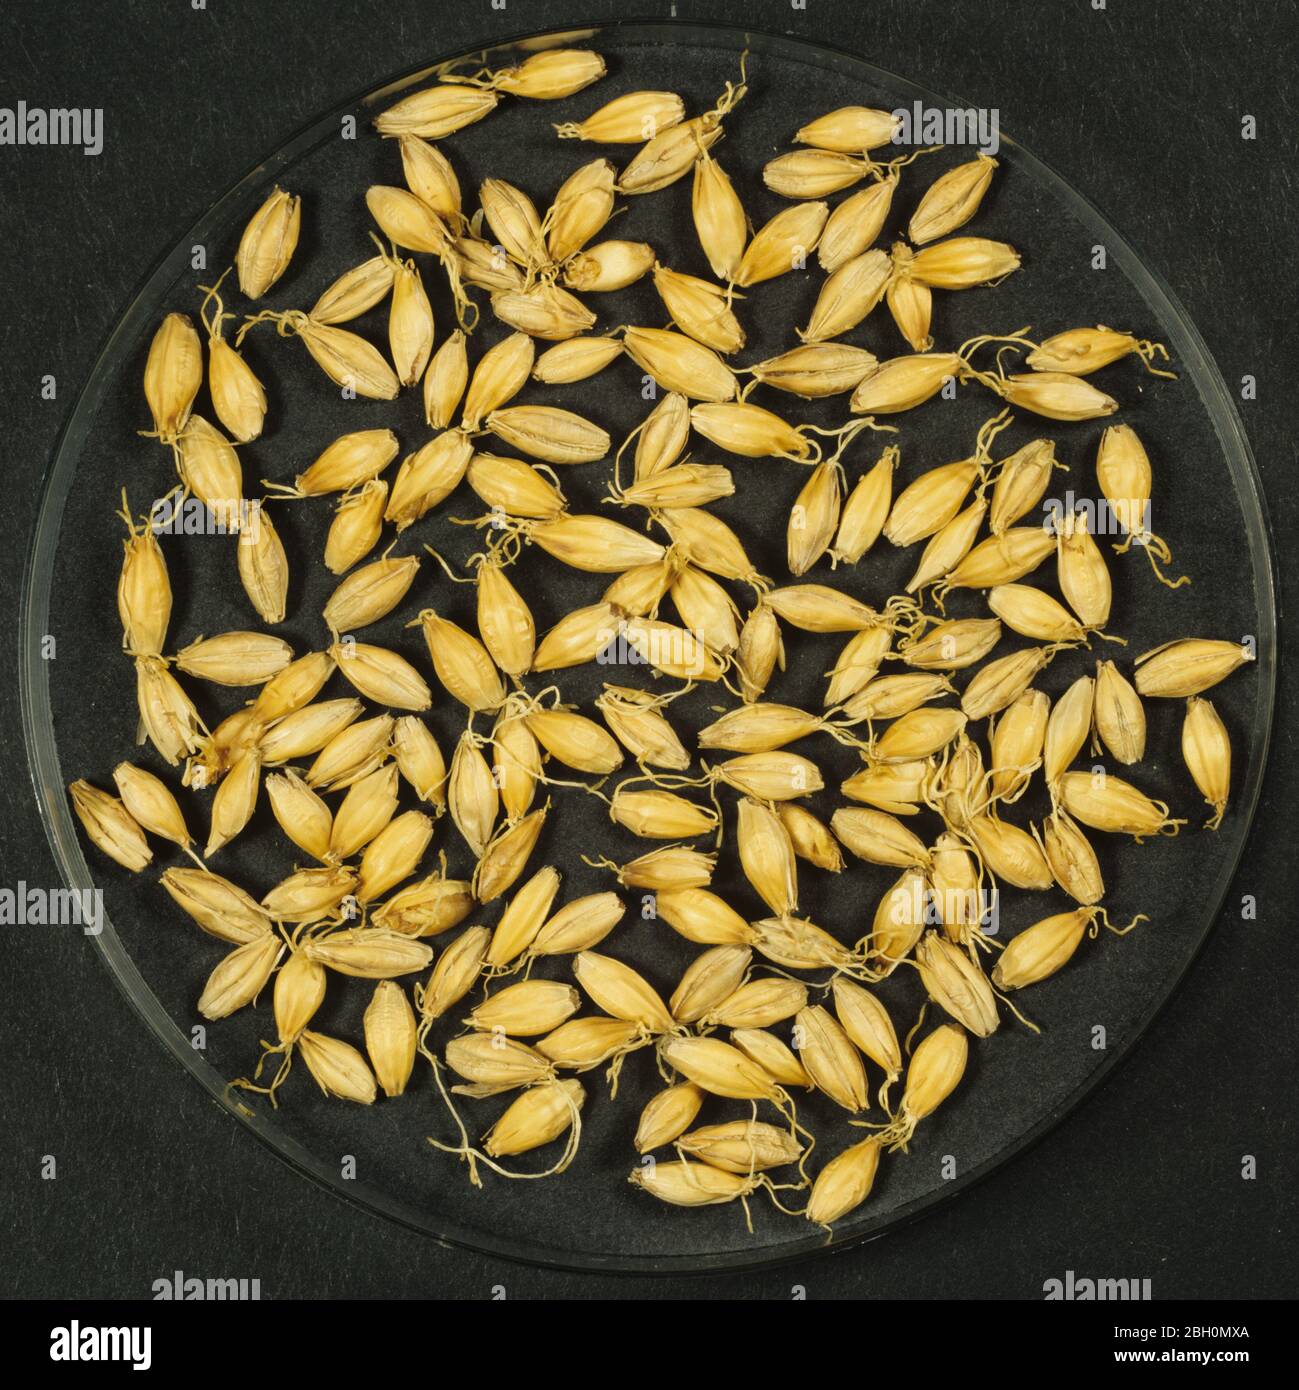 Process of malting barley seed to produce malt stage 7.  Barley seed  dried after chitting and kilning Stock Photo